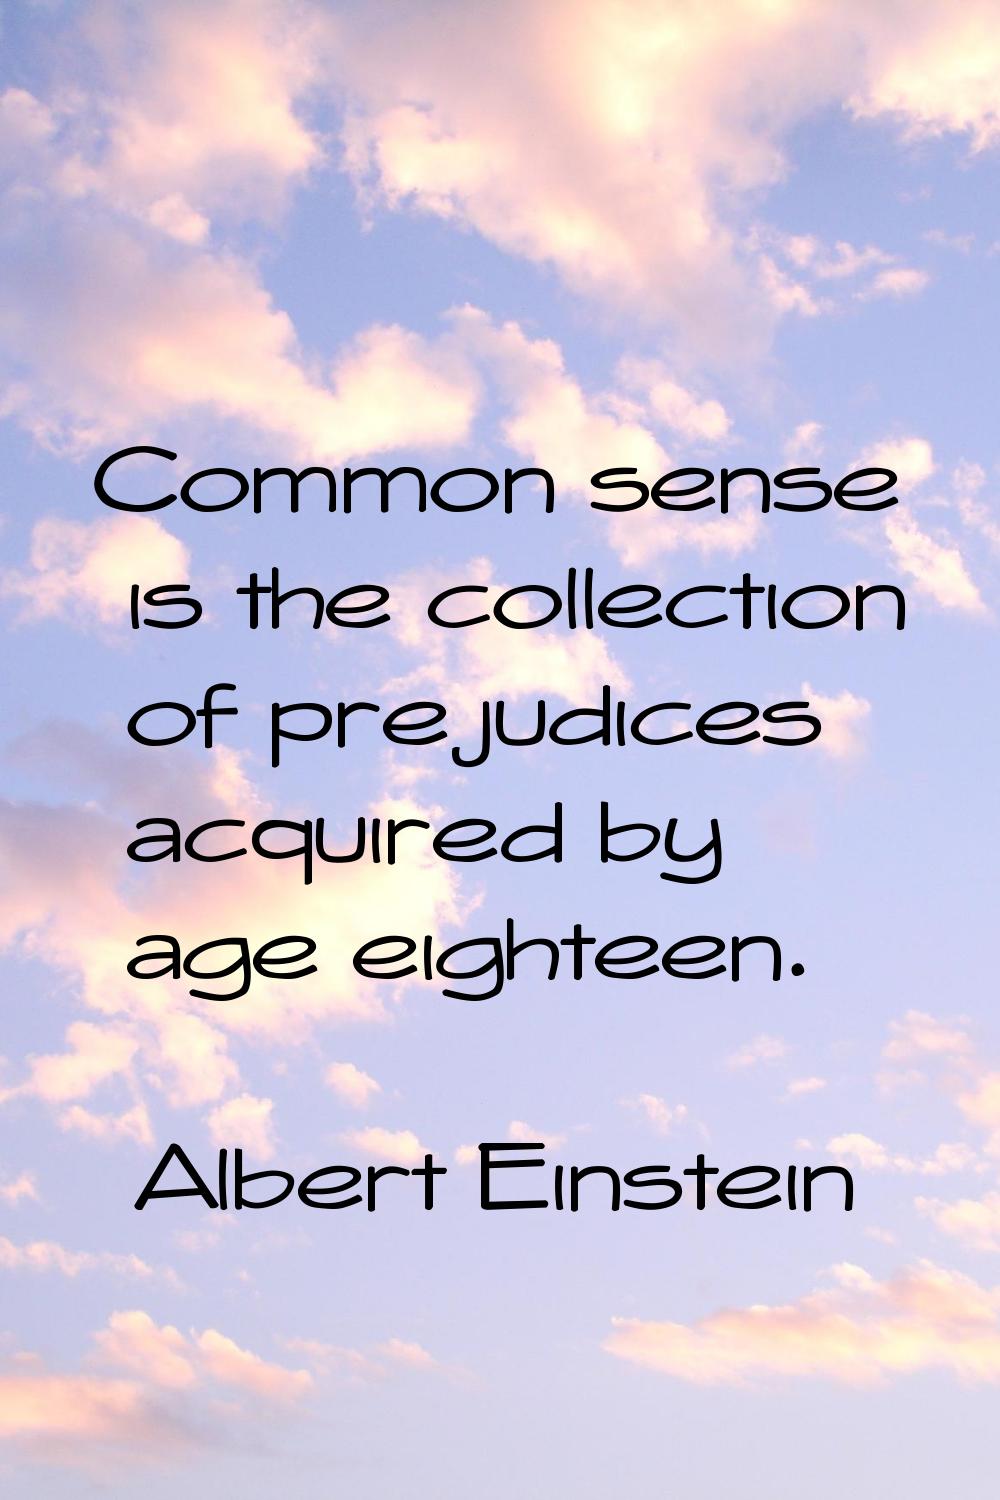 Common sense is the collection of prejudices acquired by age eighteen.